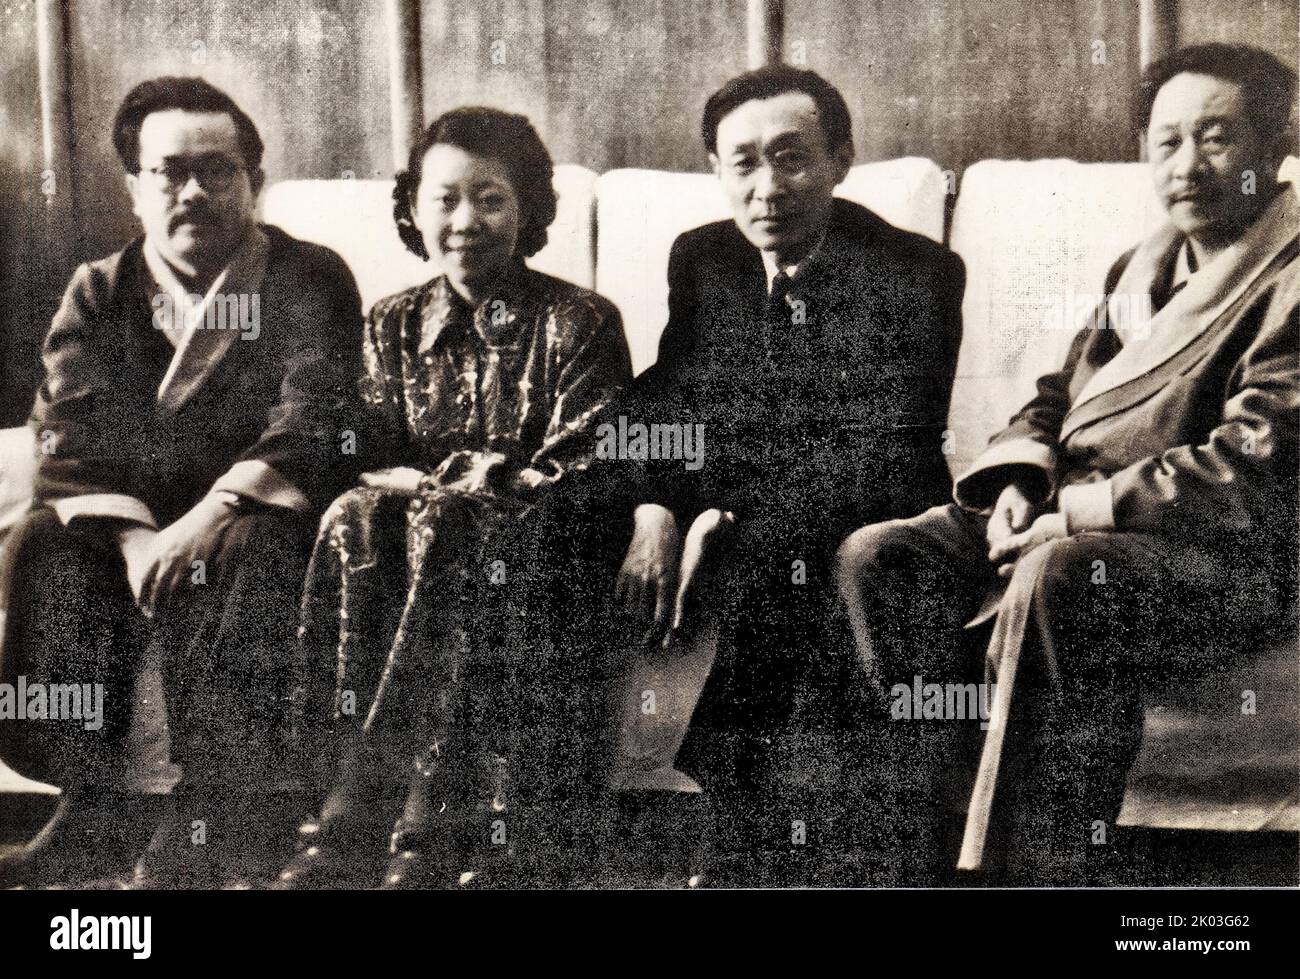 Chinese Ambassador to the Soviet Union Wang Jiaxiang (second from right), his wife Zhu Zhongli (third from right), and China's Minister of Foreign Trade Ye Jizhuang (first from right), who was recuperating in the Soviet Union, visited Ren Bishi together. Ren Bishi was a military and political leader in the early Chinese Communist Party, In the early 1930. Stock Photo